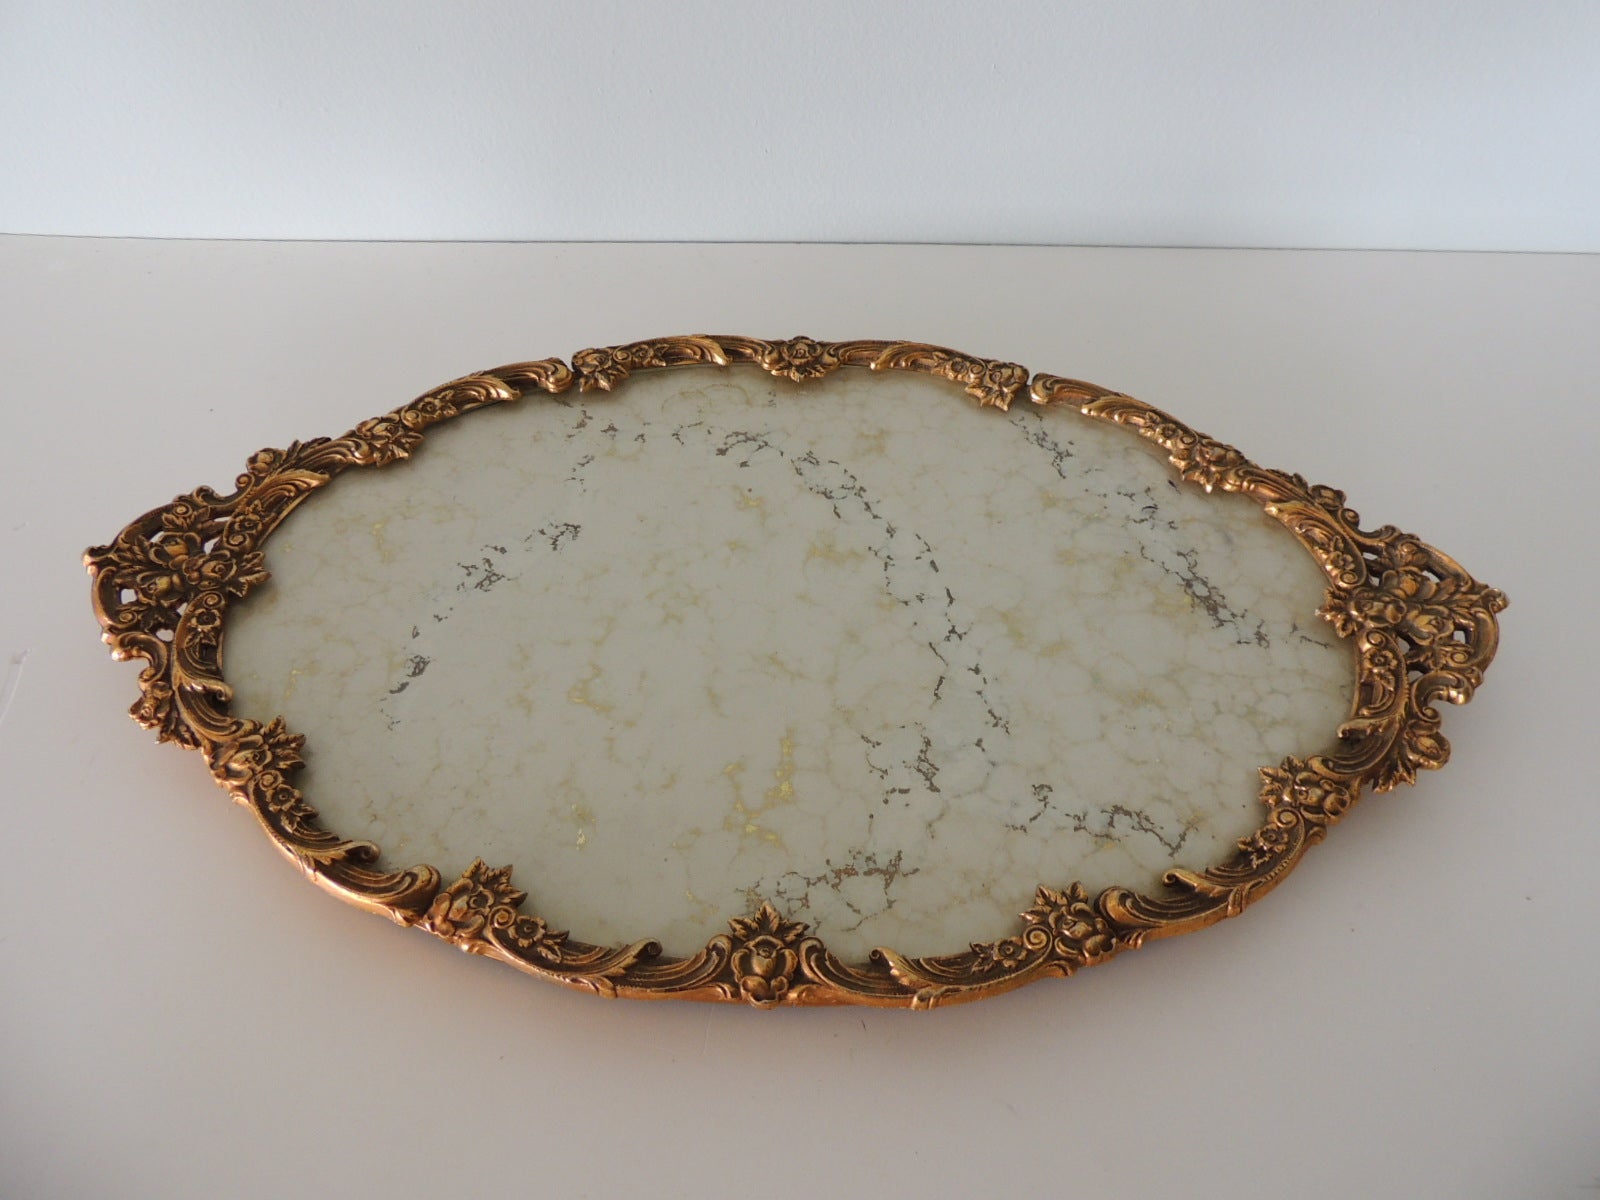 Large Vintage Filigree Gold Frame Decorative Oval Vanity Tray.
Milk glass effect and gold reversed paint aka 